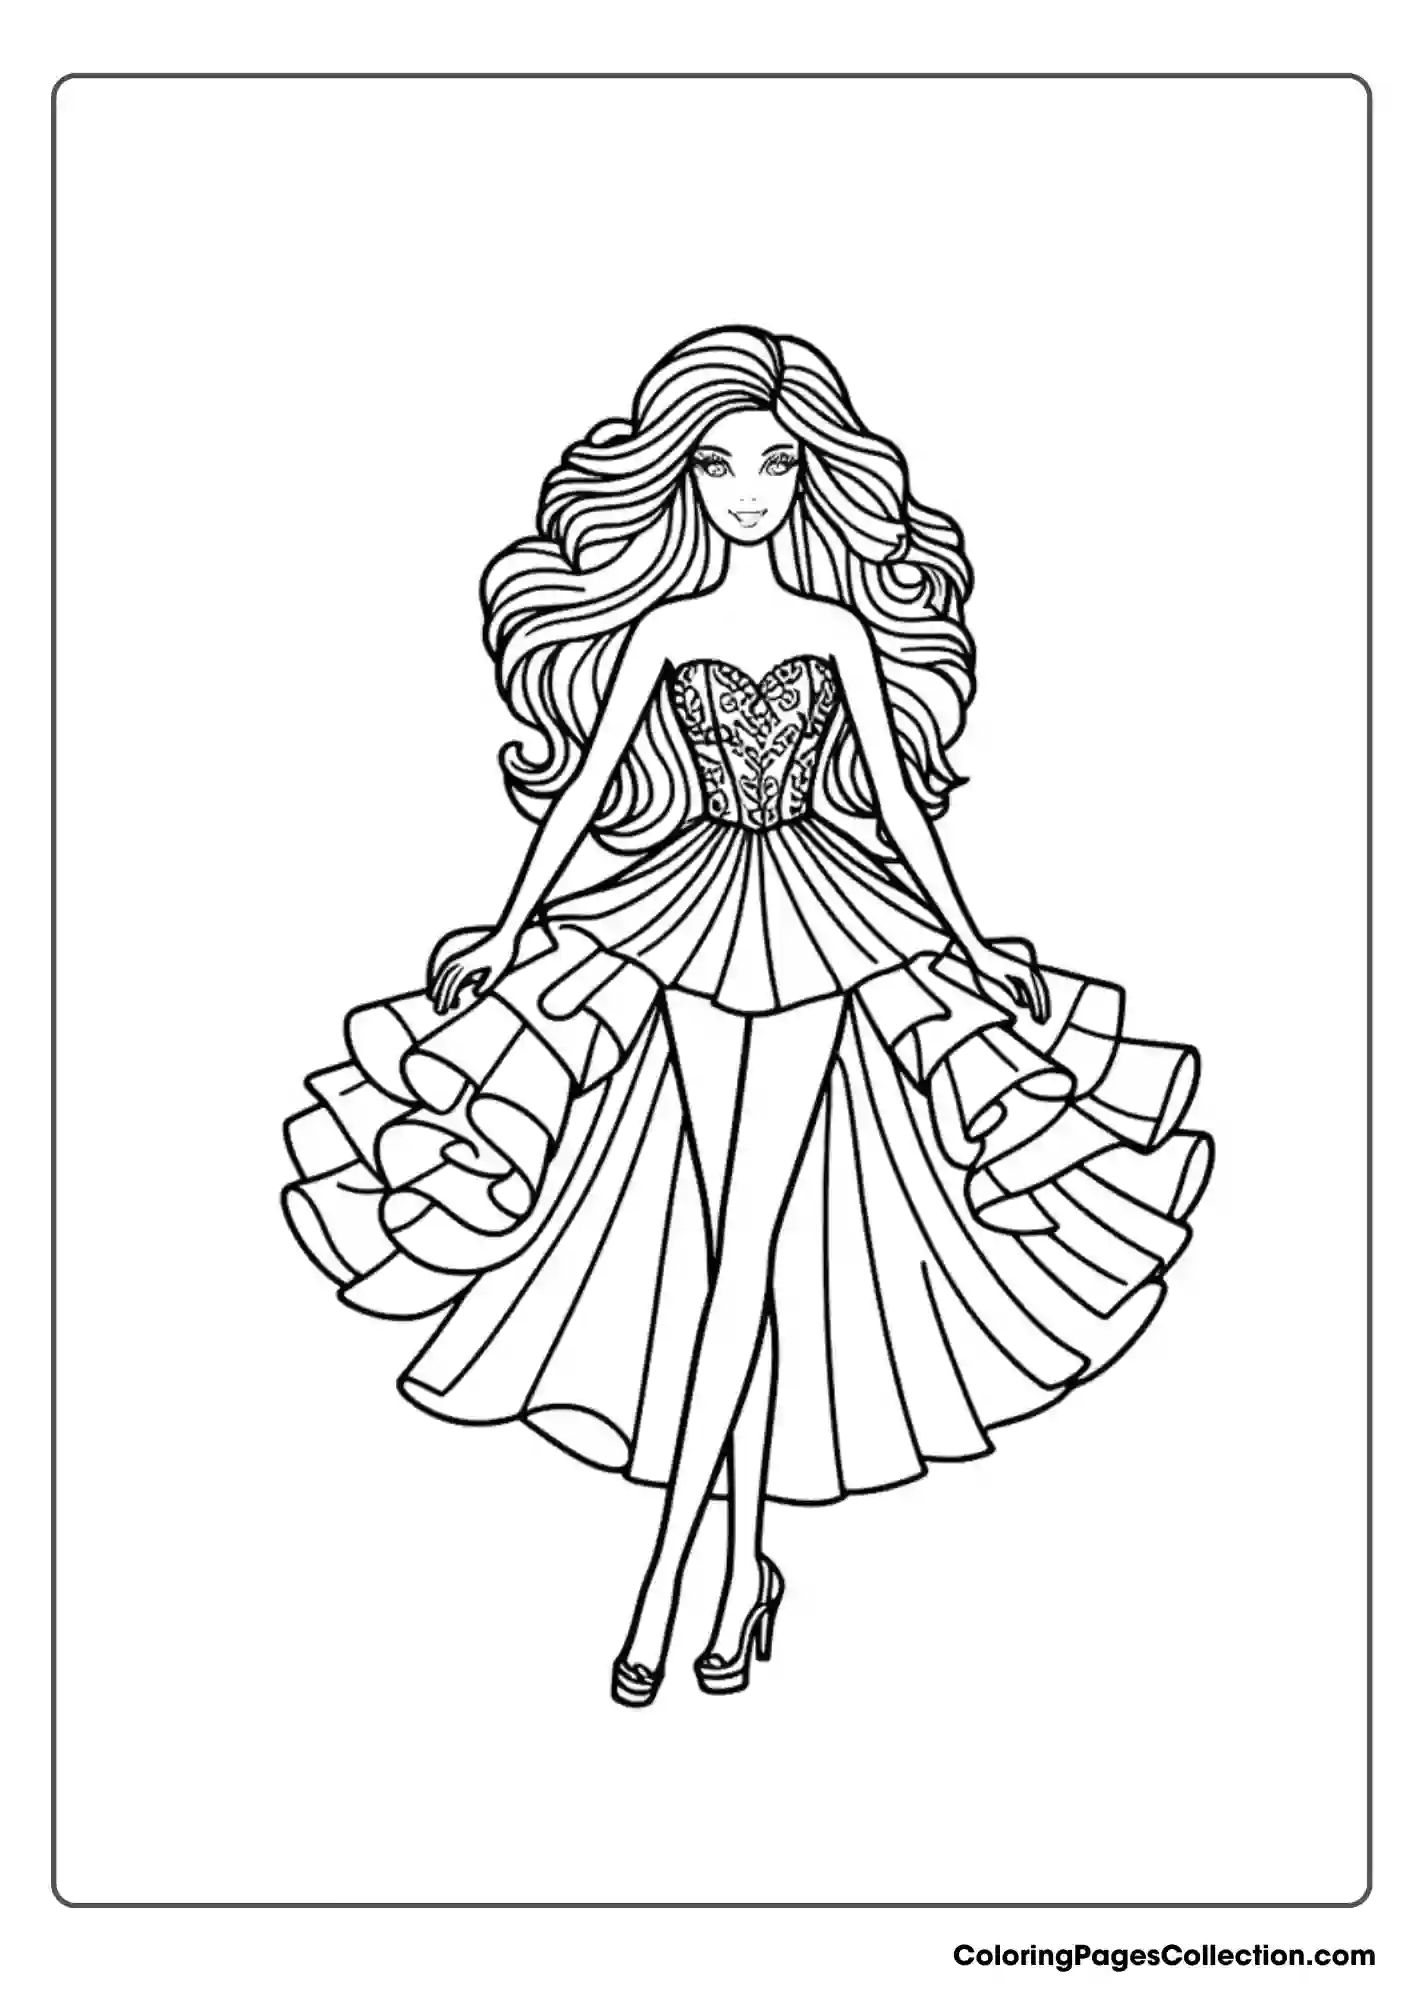 princess-day-coloring-pages